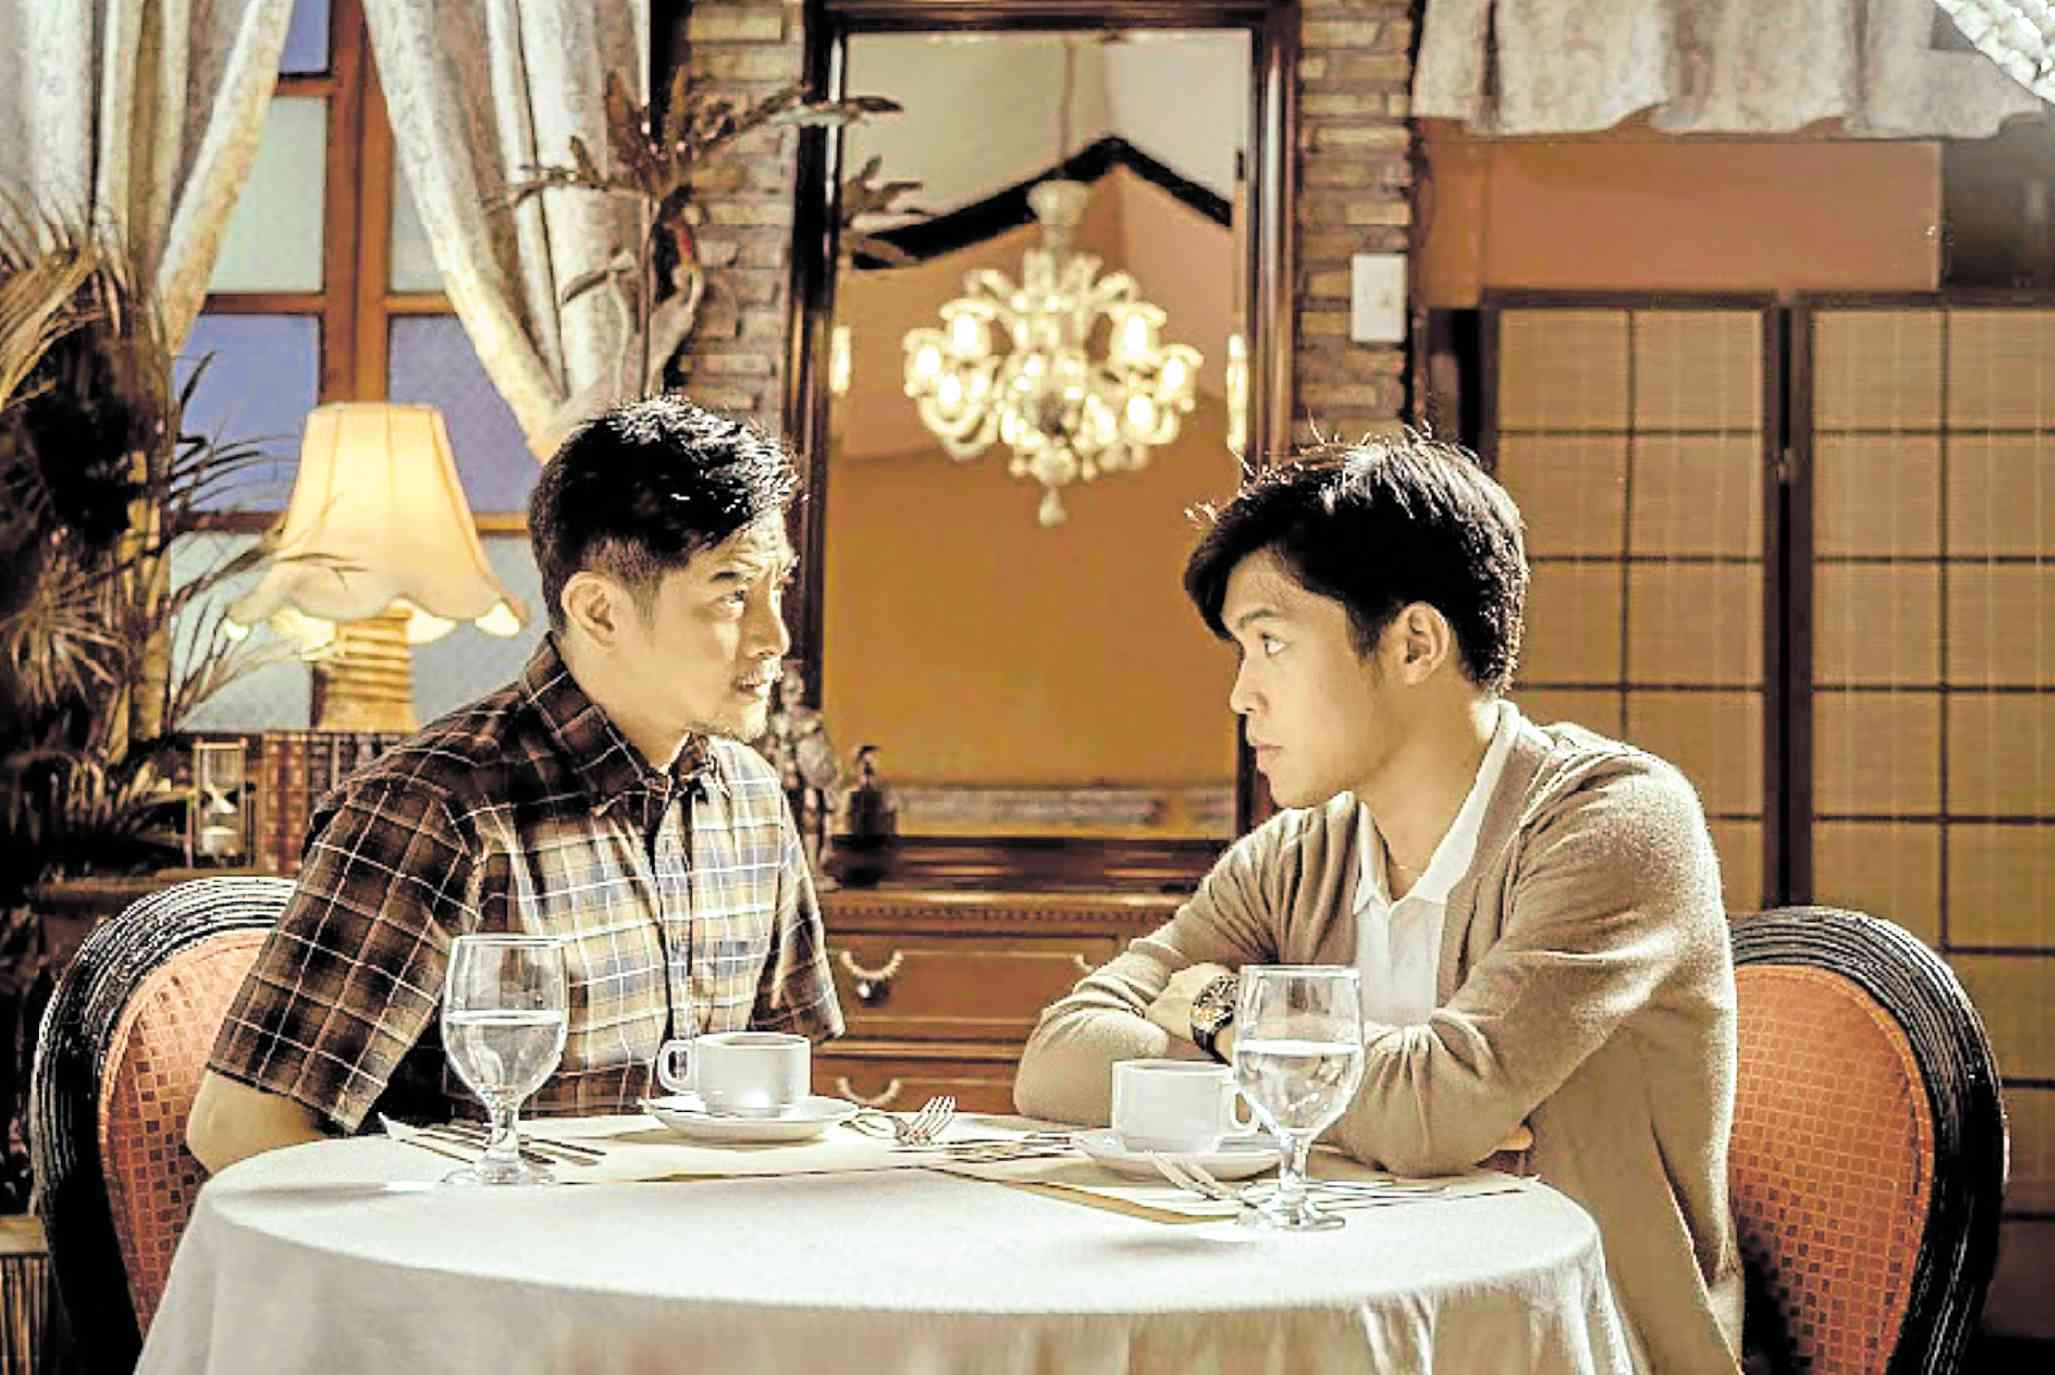 Romnick Sarmenta (left) and Elijah Canlas in “About Us But Not About Us”